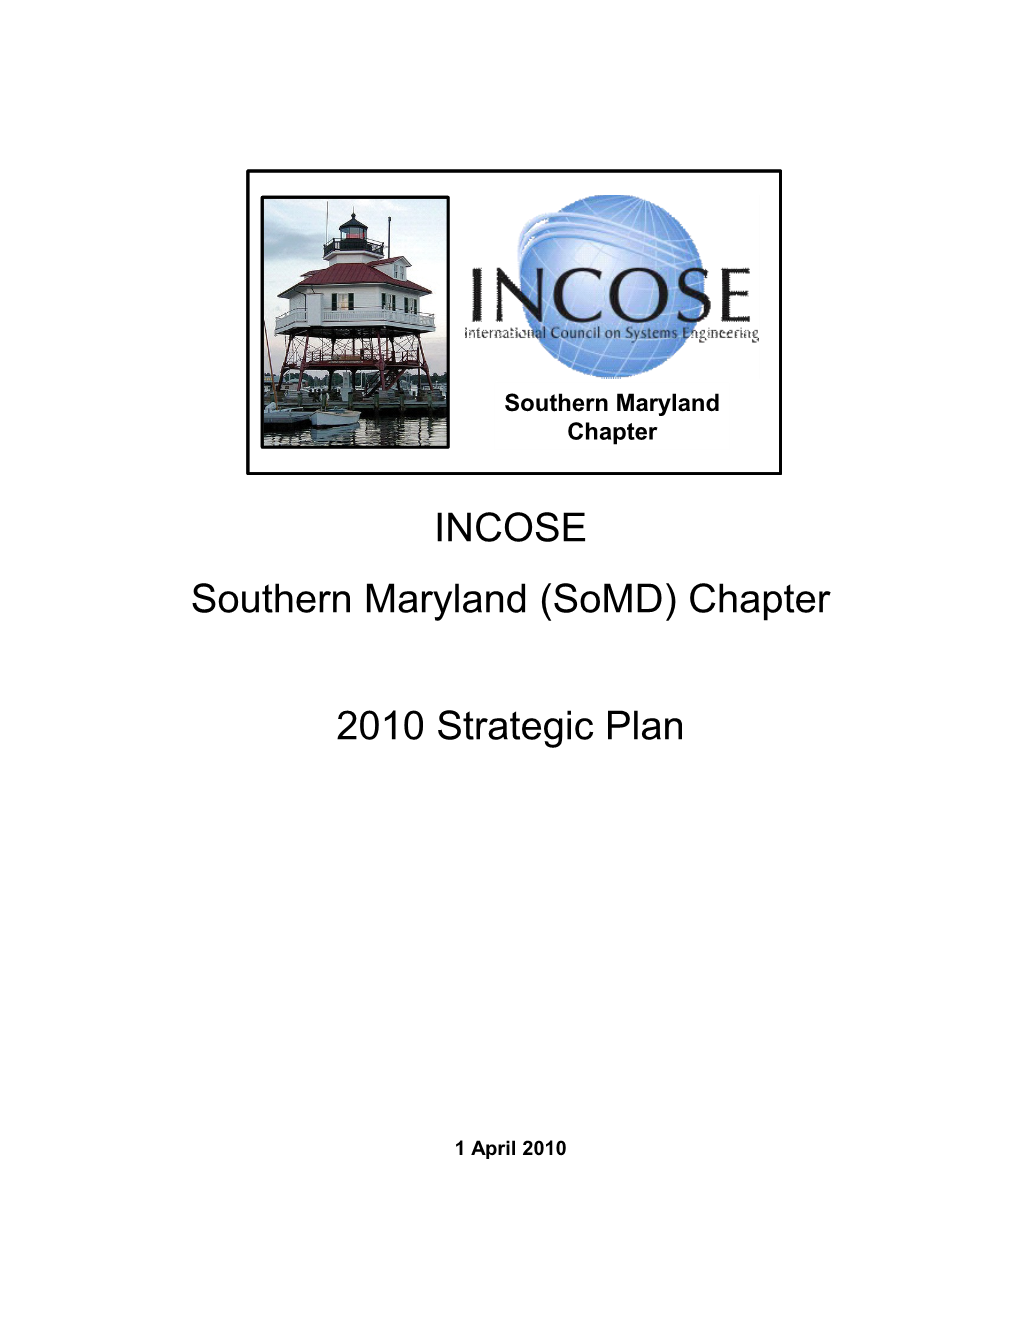 INCOSE Southern Maryland Chapter